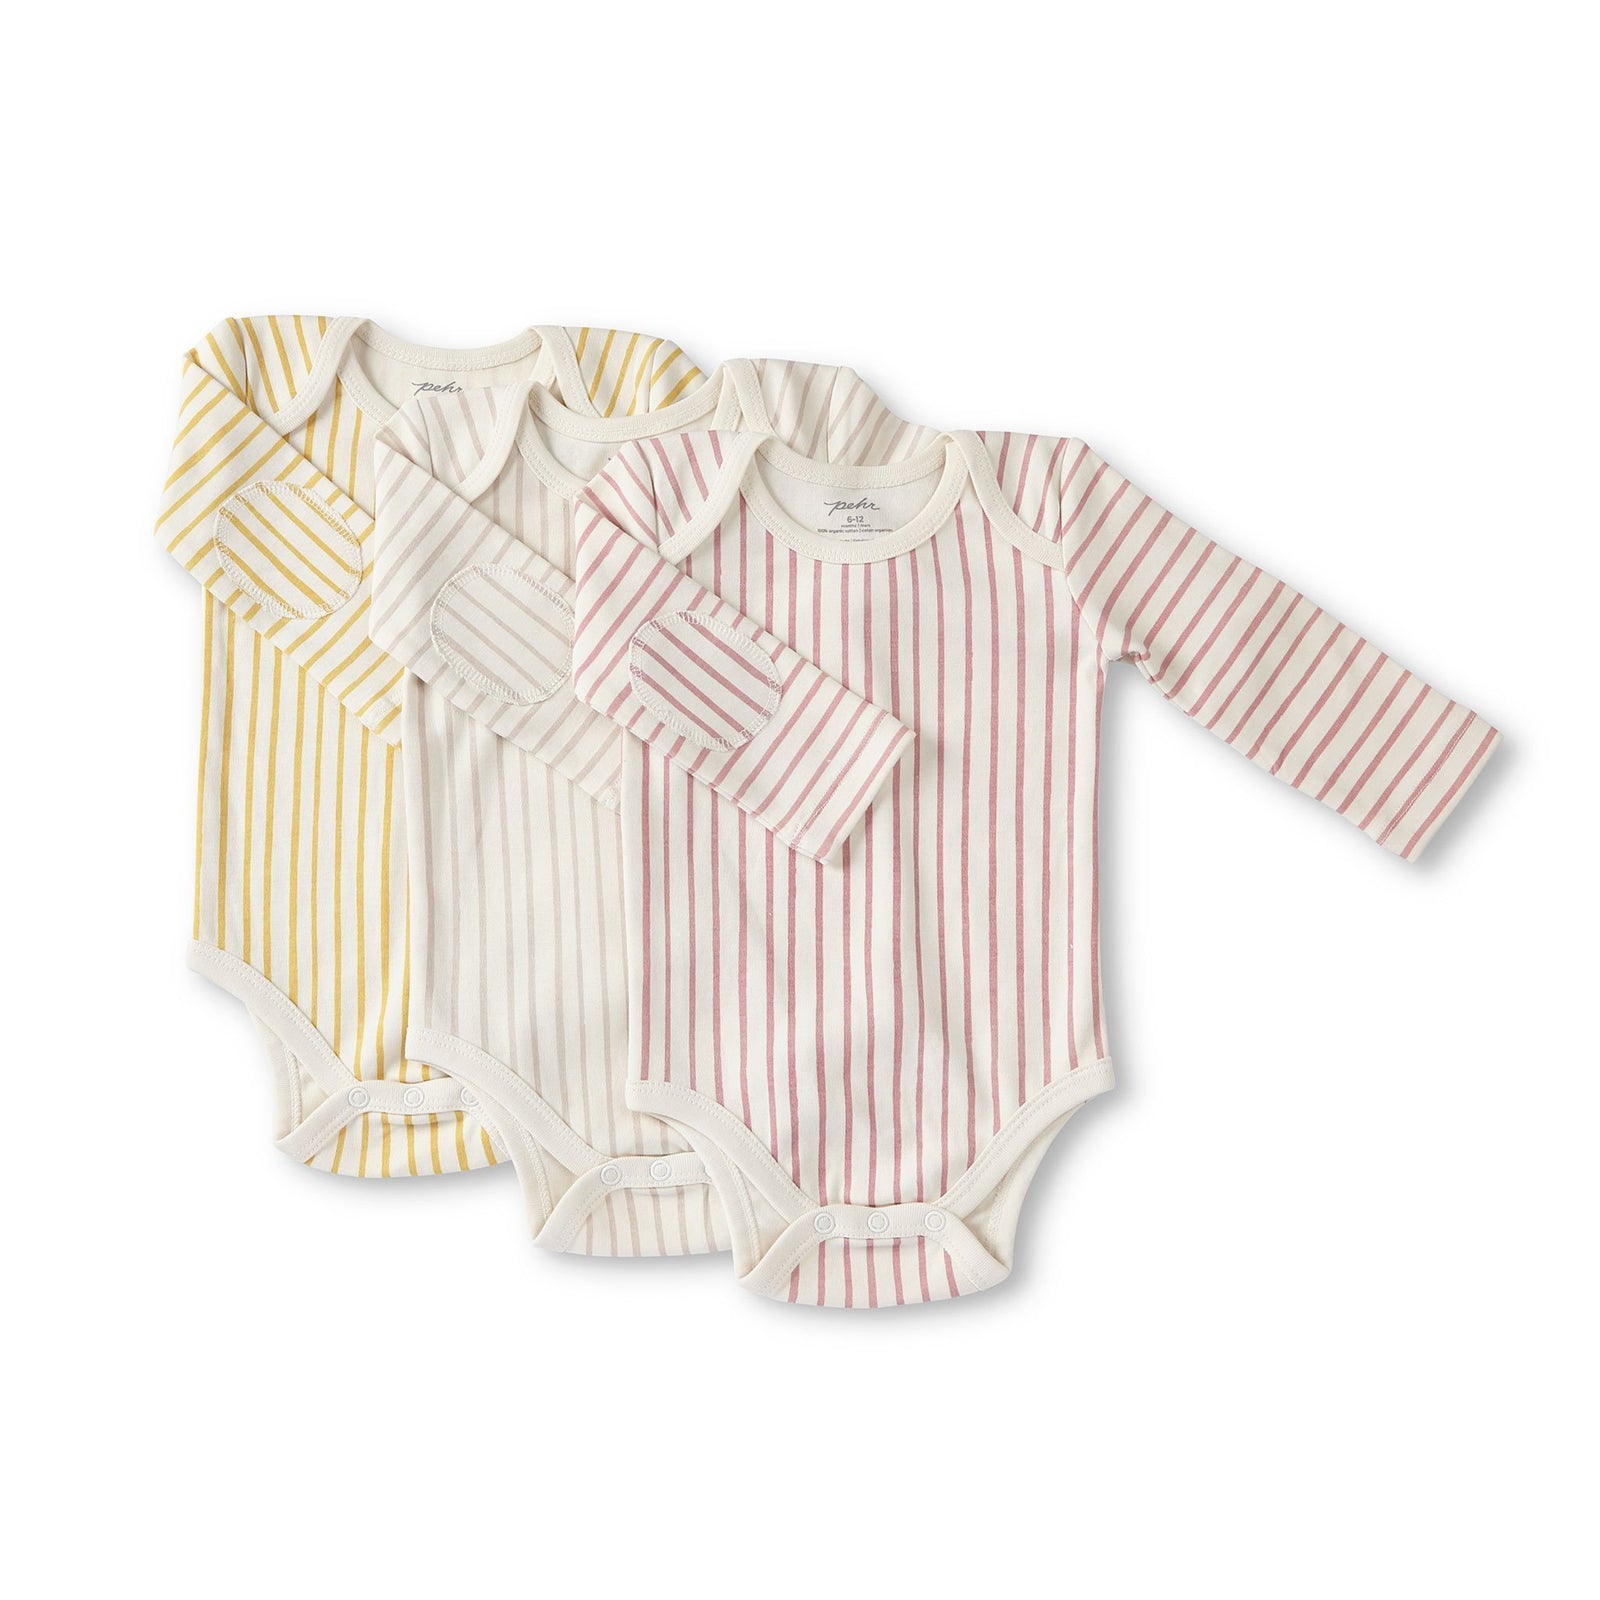 Pehr Stripes Away Marigold, Pebble Grey, and Dark Pink Organic One-Piece, Long Sleeve layered over top of one another. GOTS Certified Organic Cotton & Dyes. White with stripes, long sleeve, button closure at bottom.